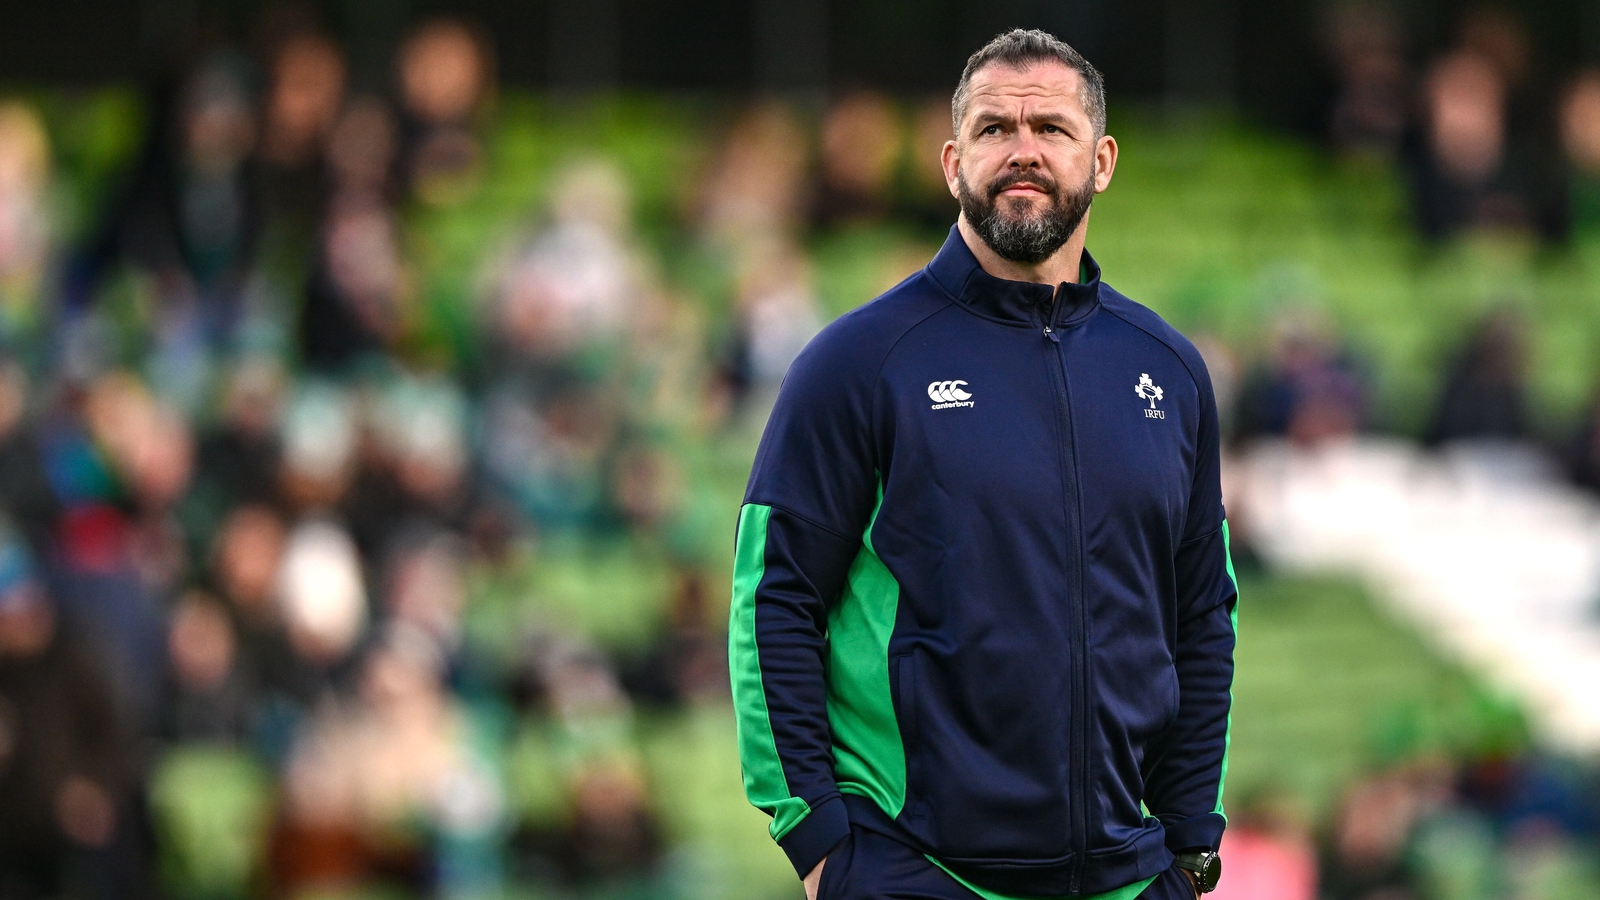 Farrell content with win but predicts tough test ahead